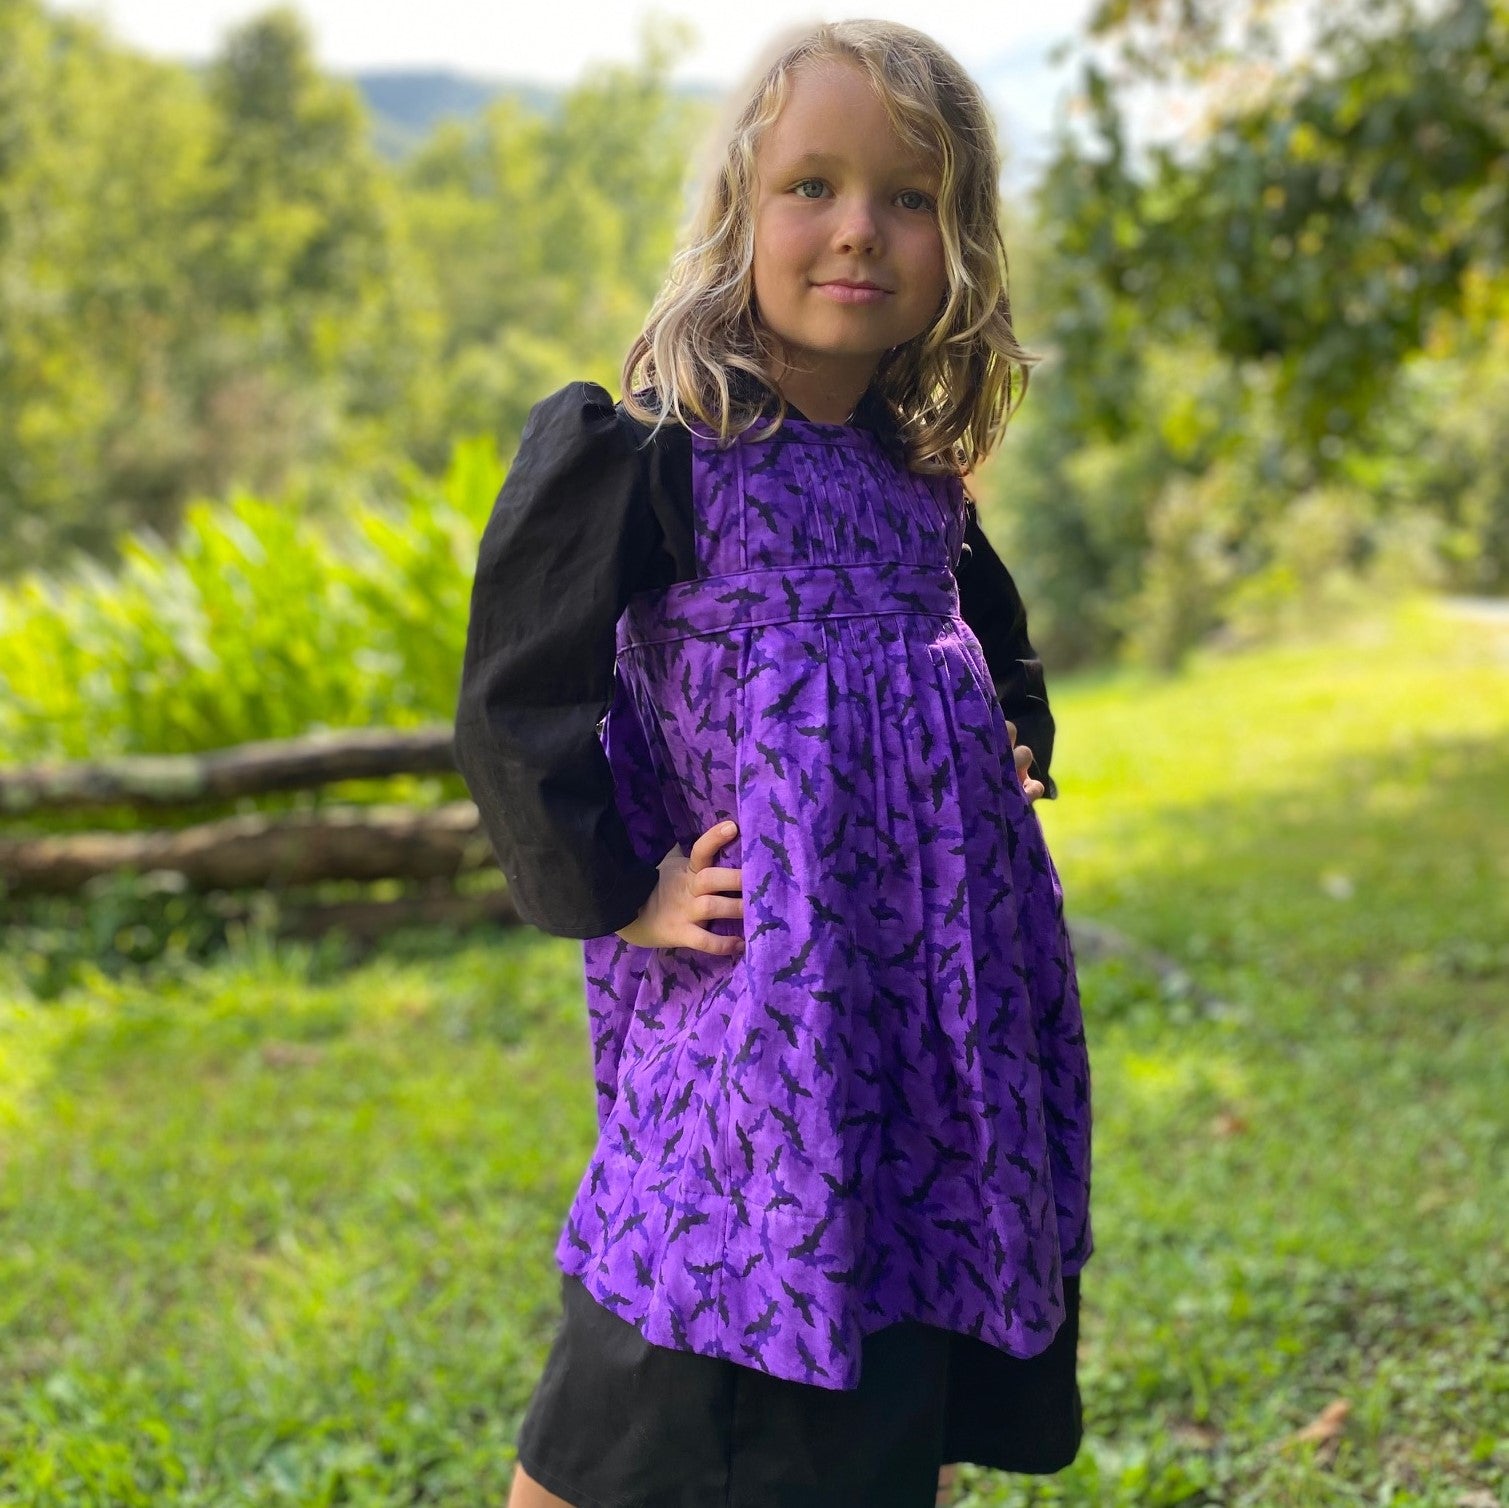 Halloween hack: Turning the 213 Child's Prairie Dress and Pinafore into a Witch's Dress